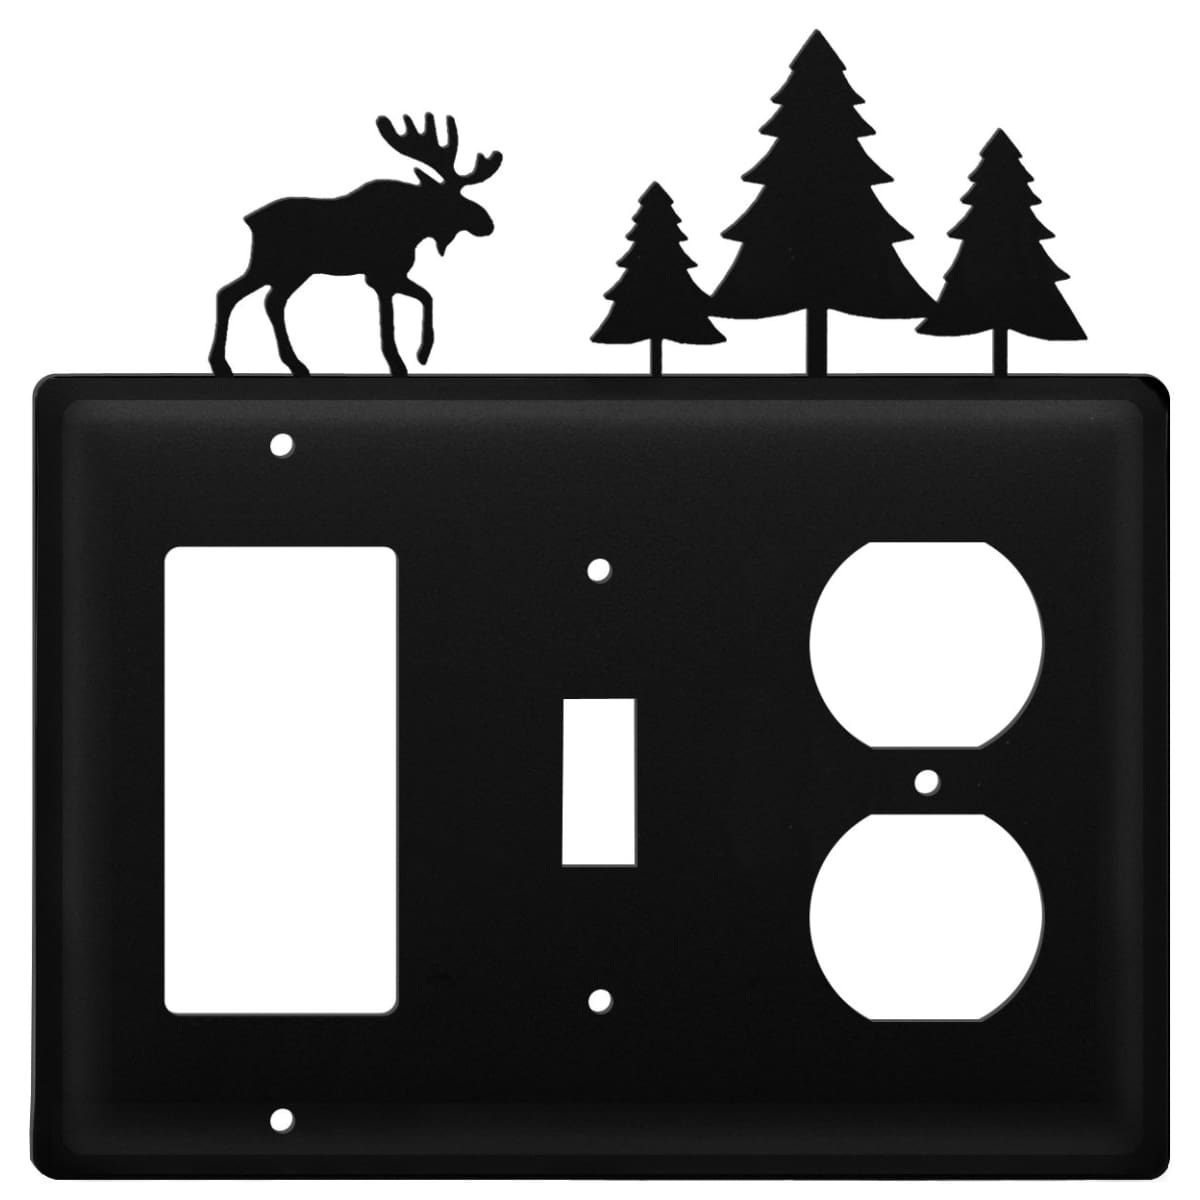 Triple Moose & Pine Trees Single GFI Switch and Outlet Cover CUSTOM Pr —  Village Wrought Iron Inc